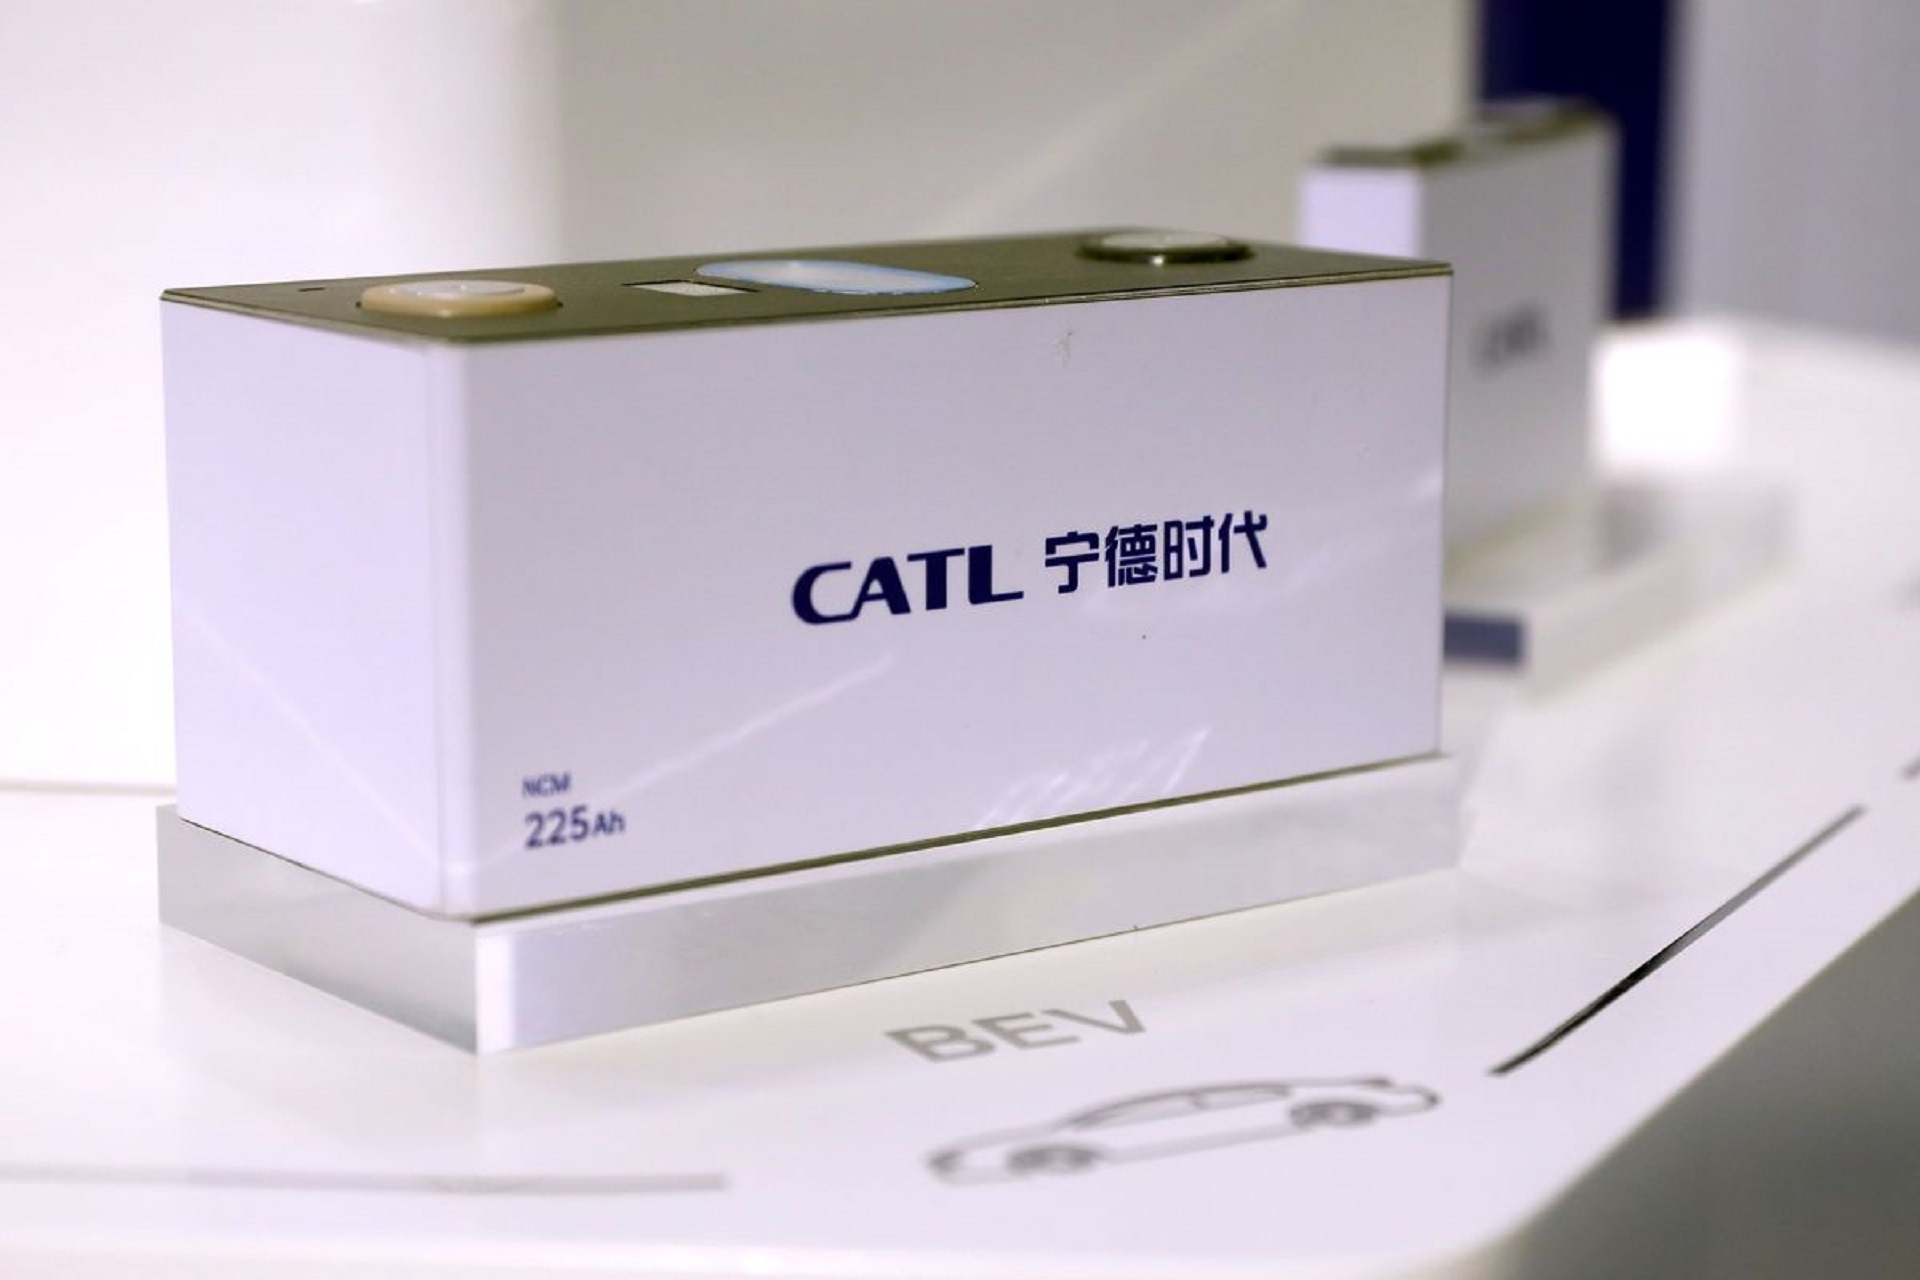 Is China's CATL Slowly Taking Over The Battery Manufacturing Industry In The World?